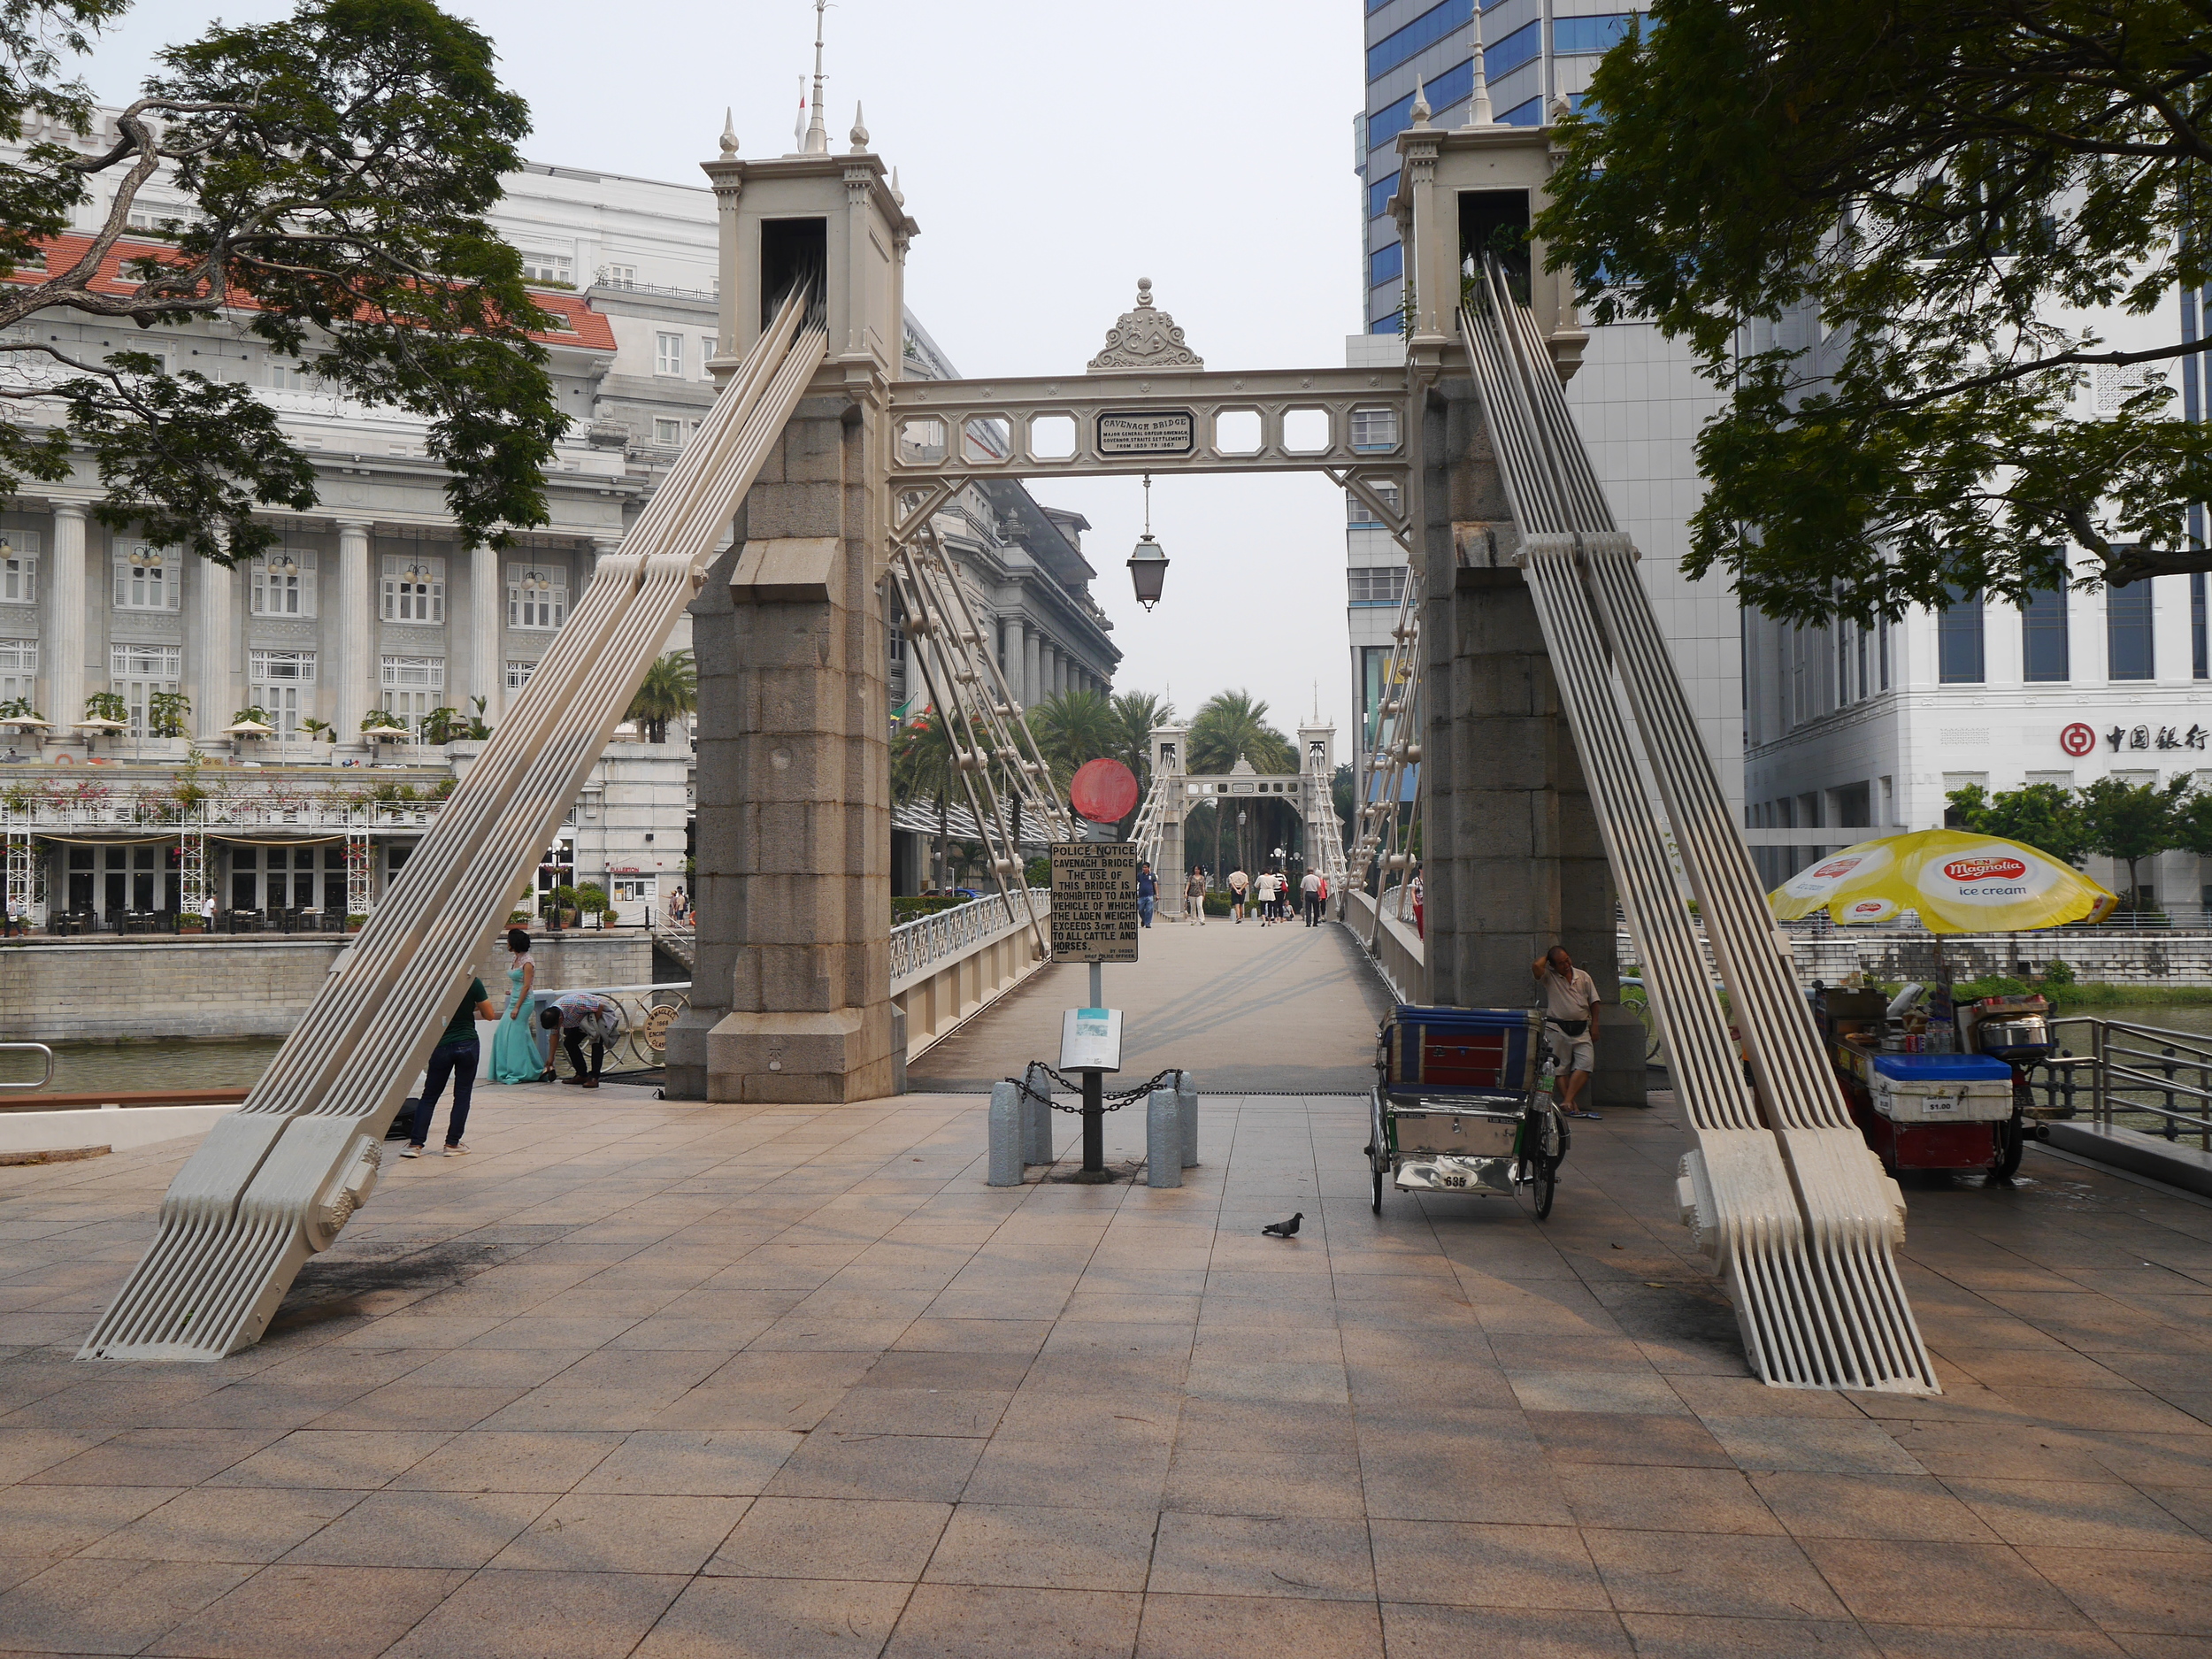  The Cavenagh Bridge (pretty sure that's not a local name). Also another glamor shoot going on to the left. 